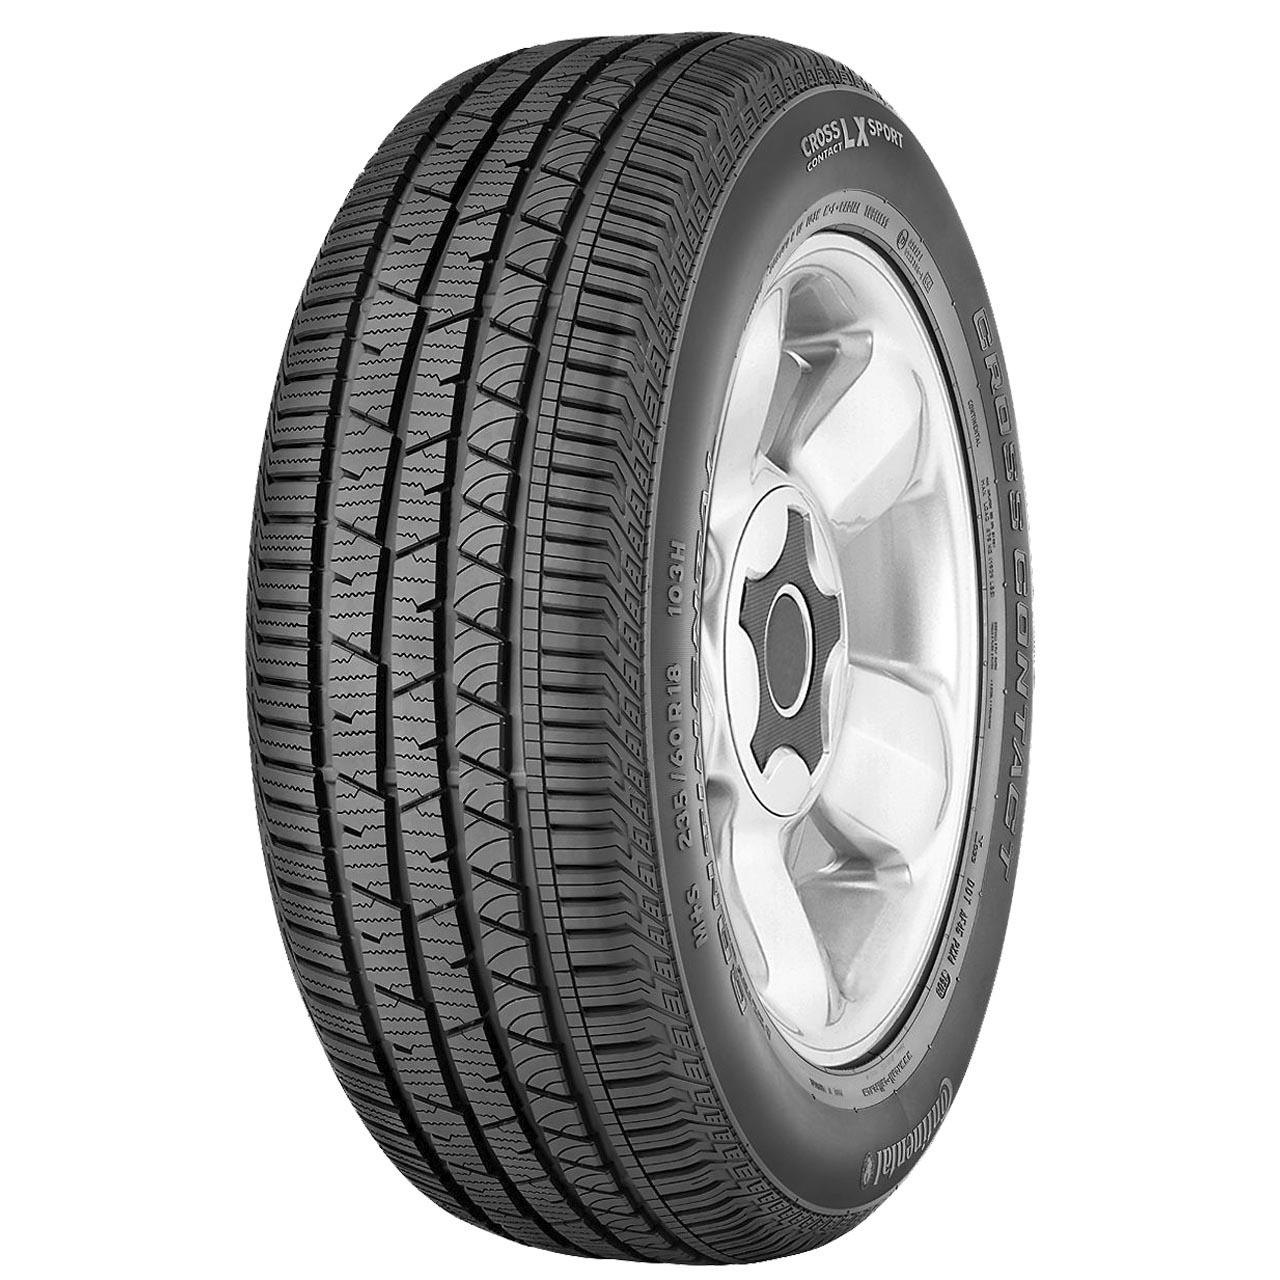 Continental CROSSCONTACT LX SPORT 255/60R19 109H FR FOR